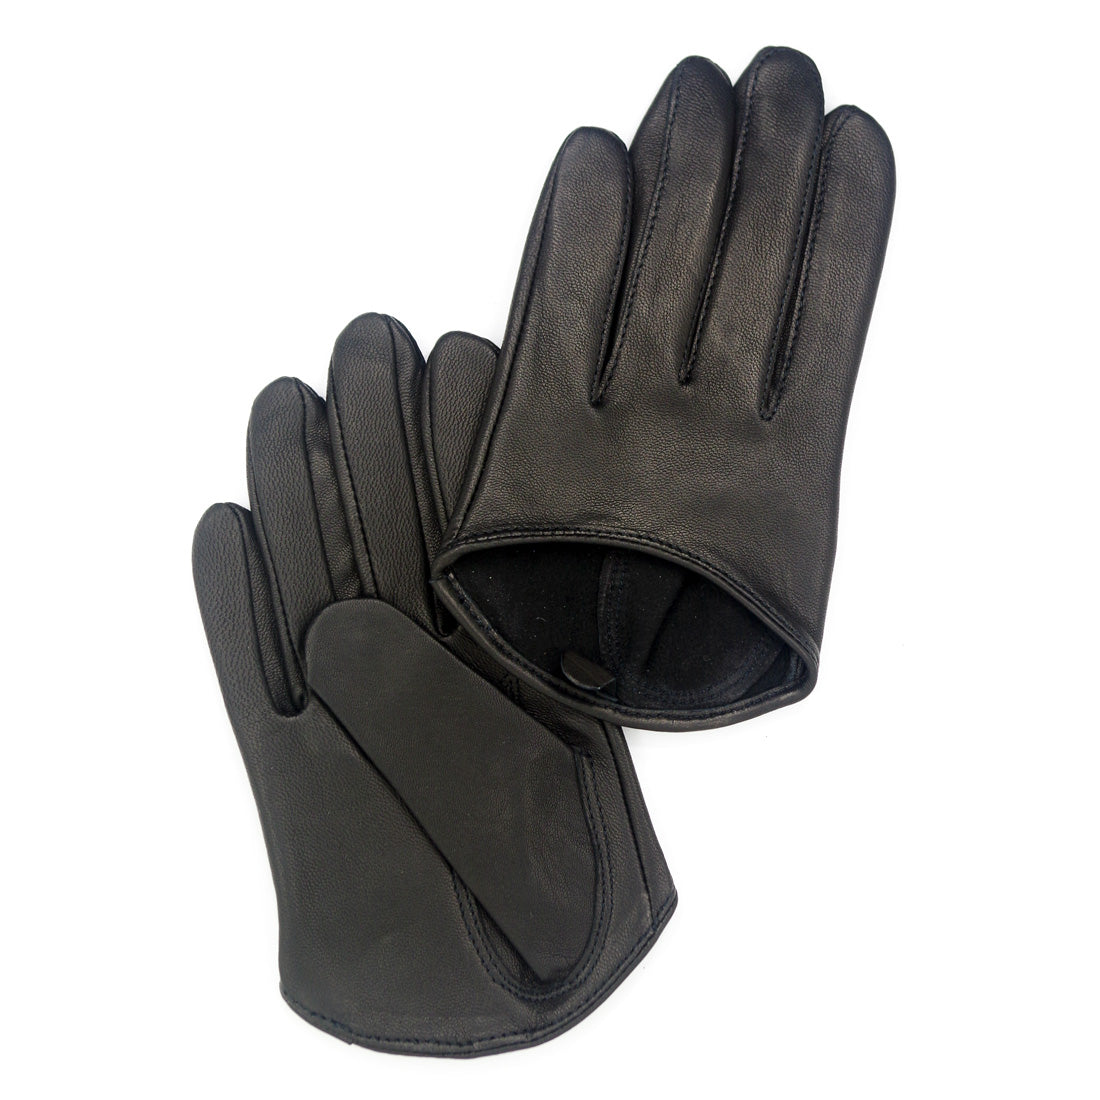 Leather Palm and Drivers Gloves